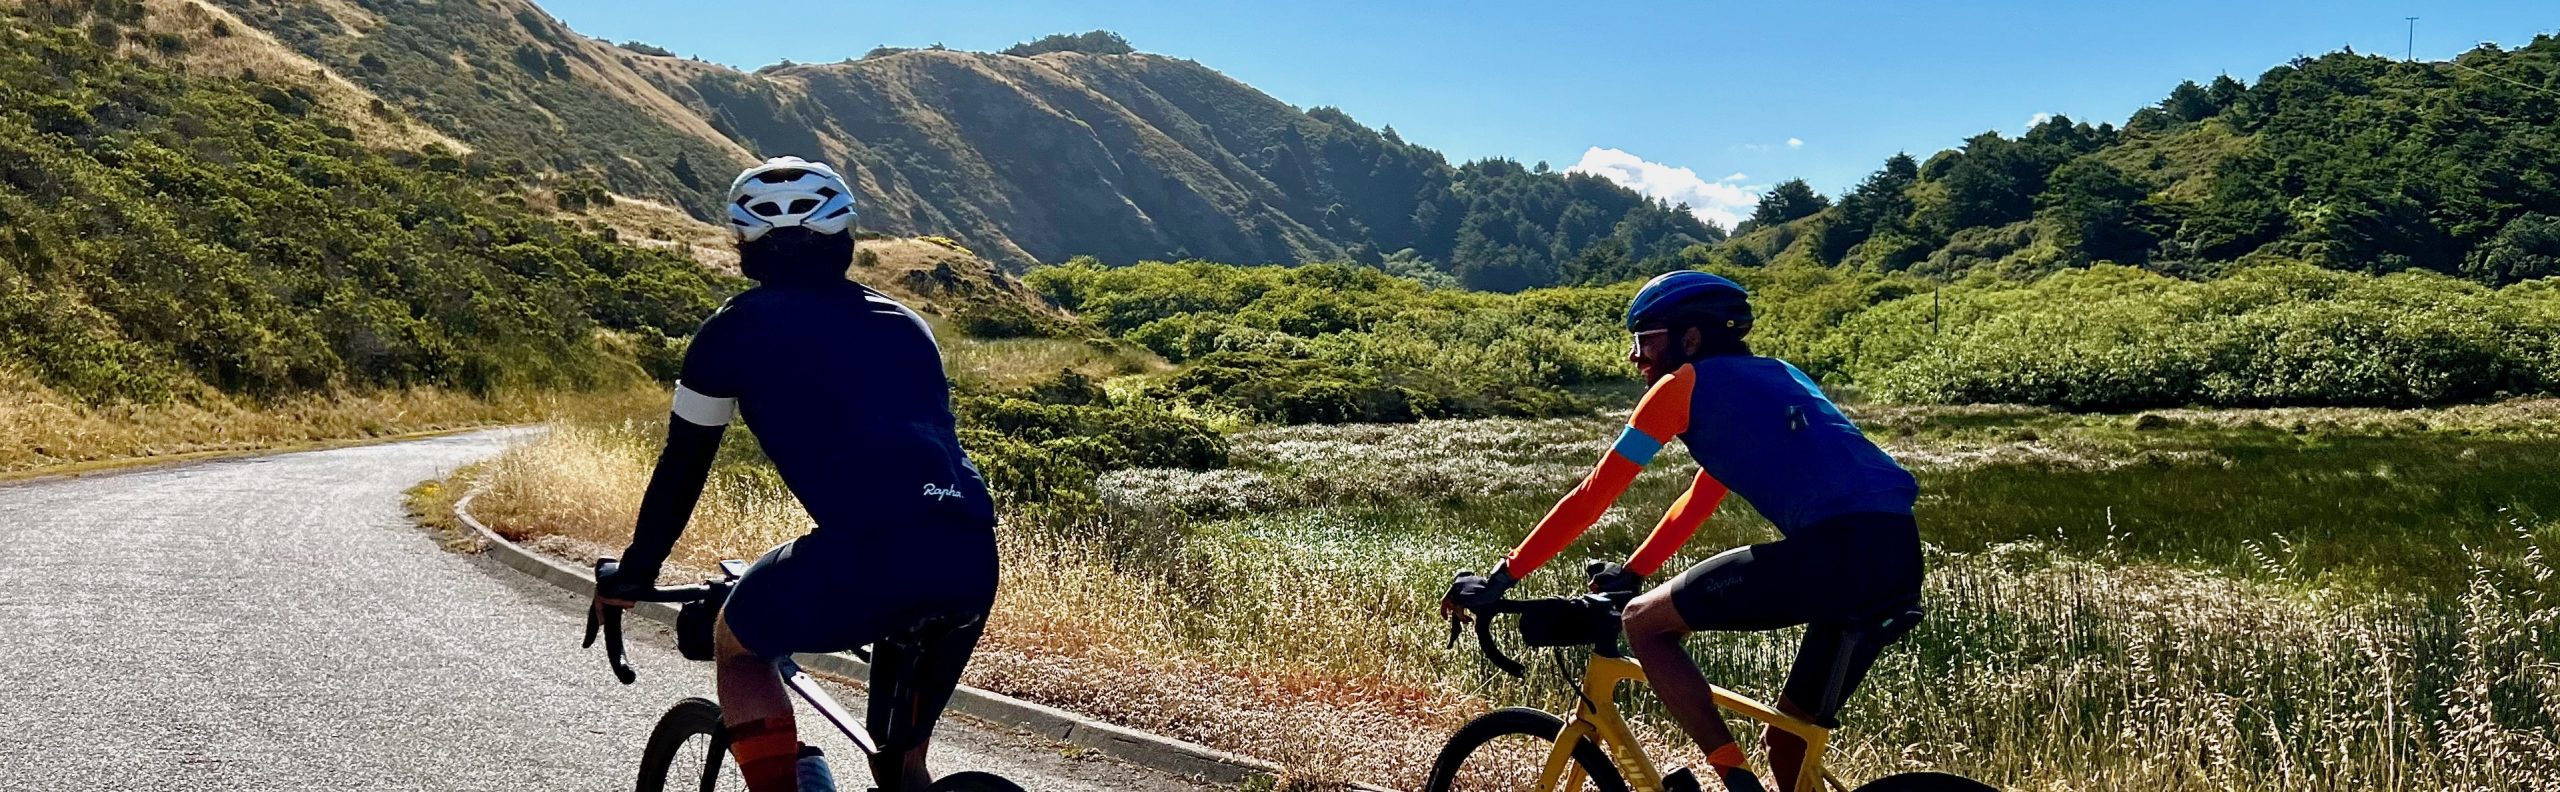 A single day gravel cycling adventure in Sonoma's West County